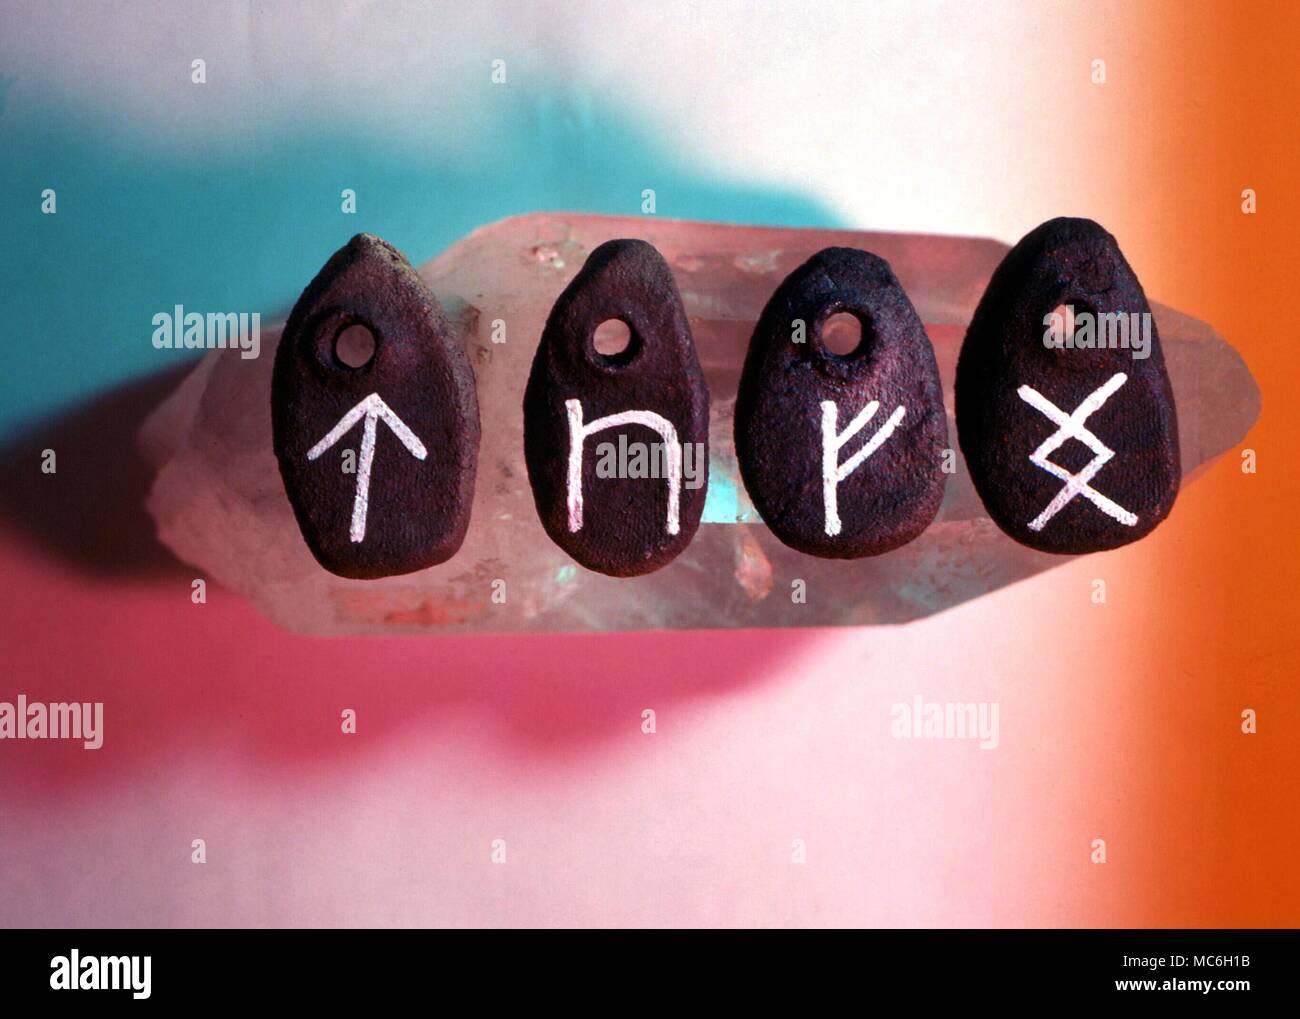 The rune stones for Tir (tree), Peord (horse), Feoh (wealth) and Ing (meaning unsure) Stock Photo